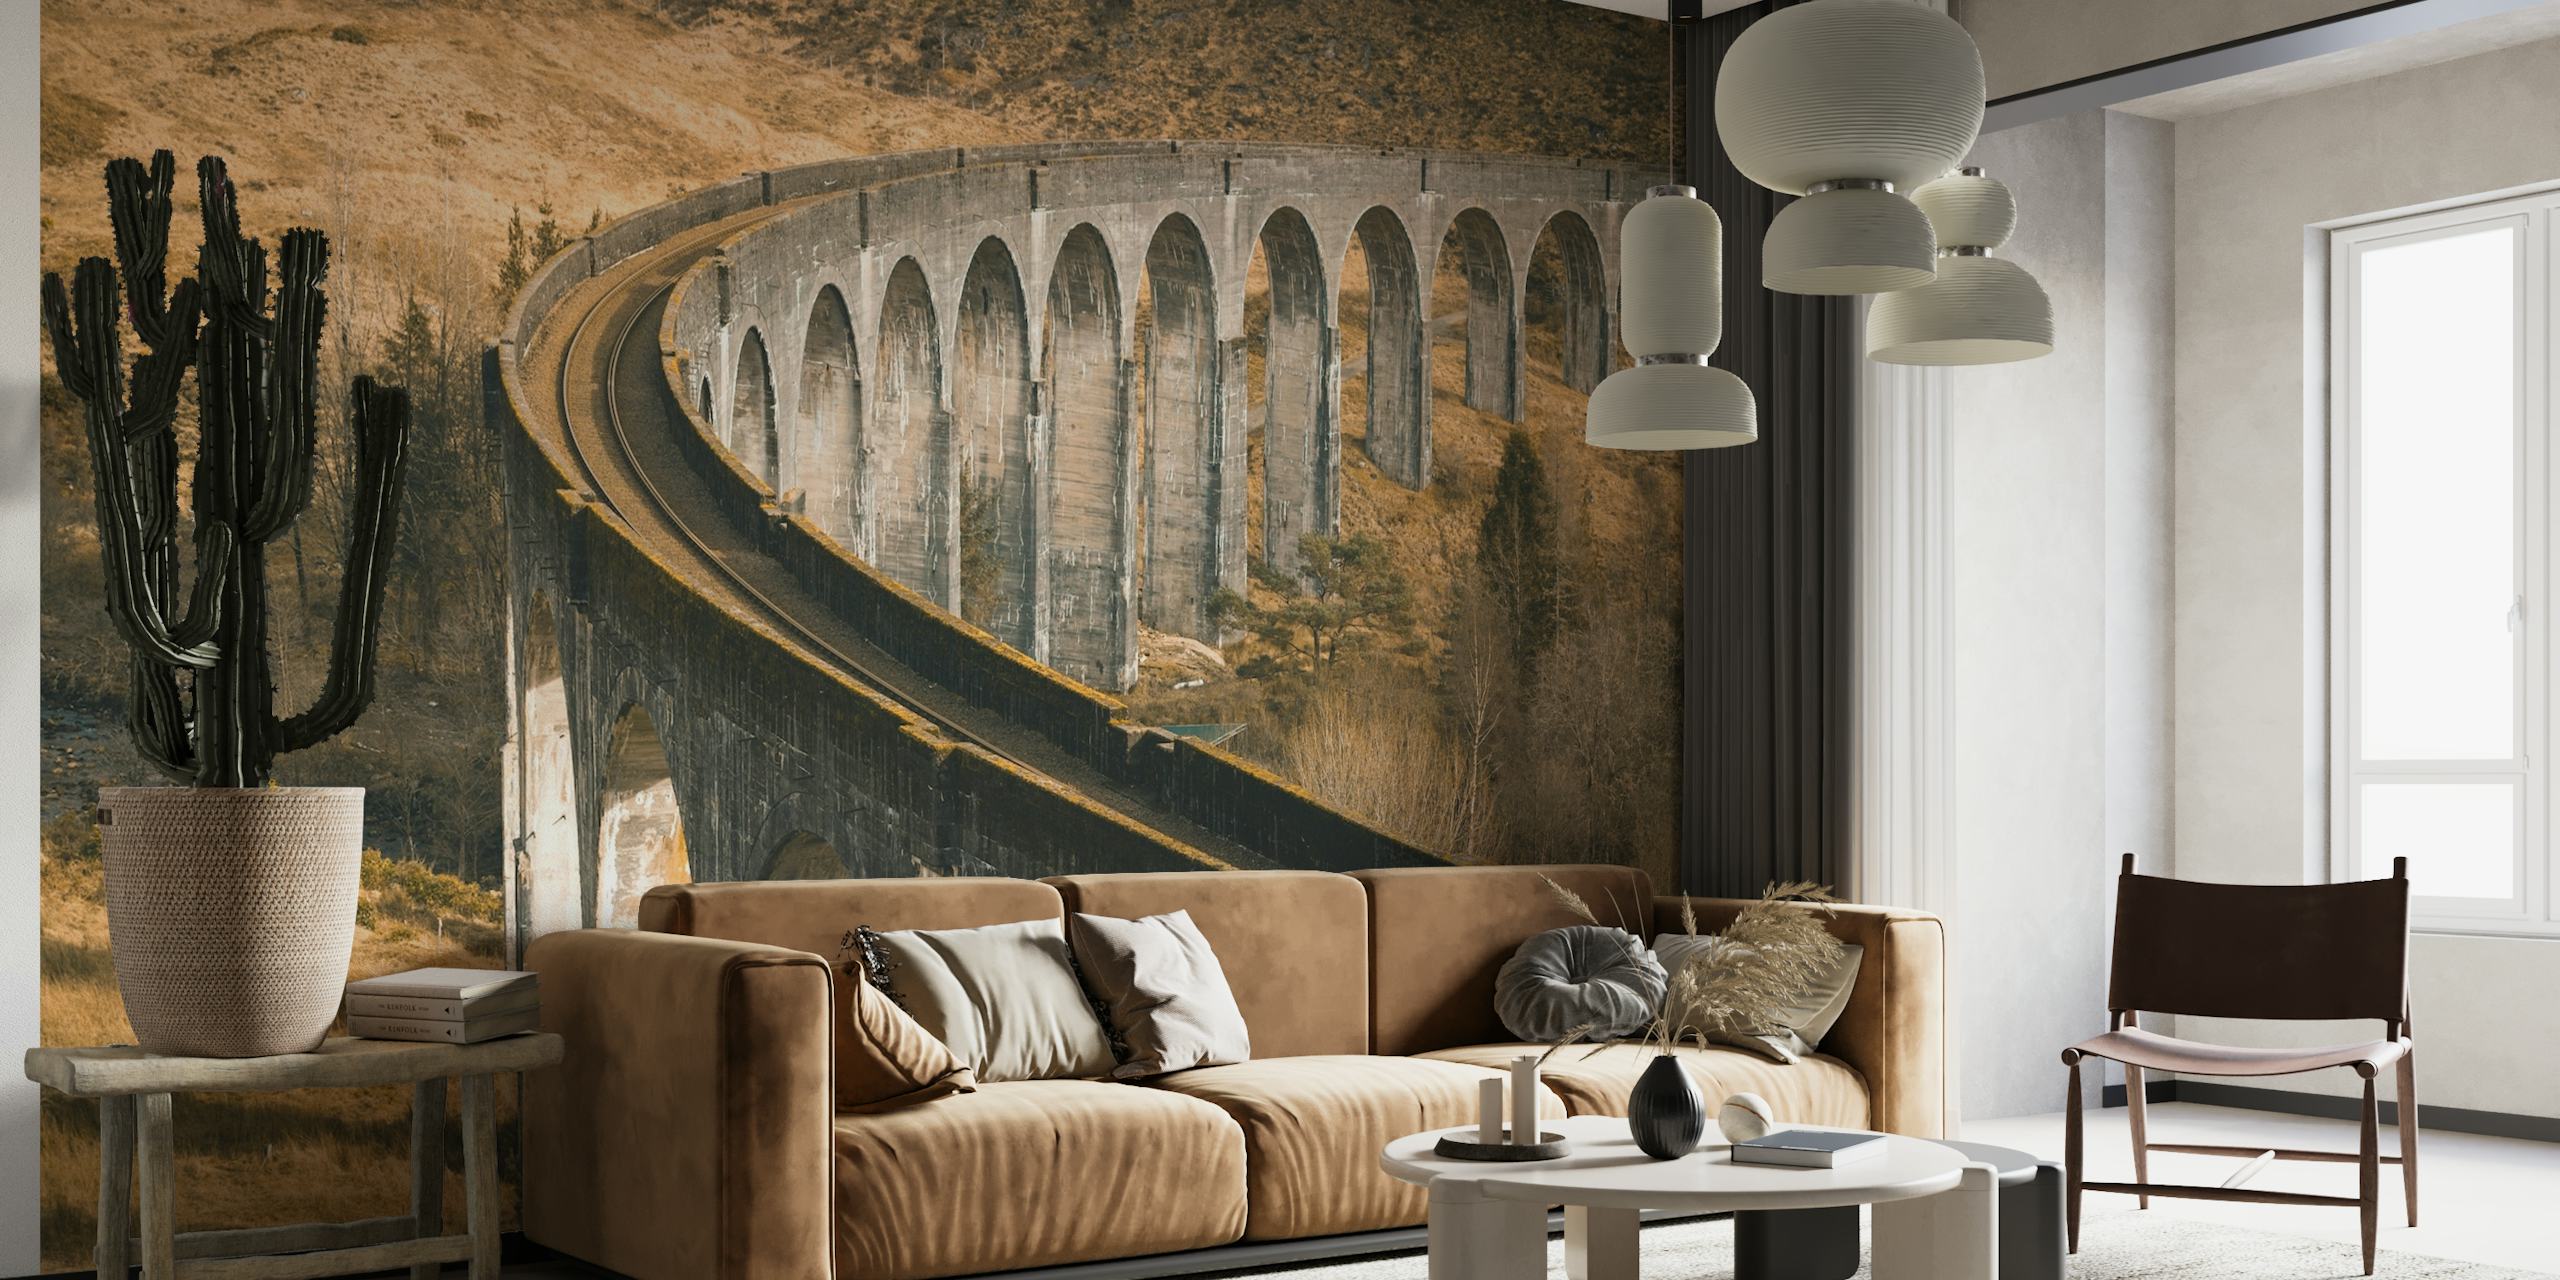 Historic Scottish viaduct in a rugged landscape wall mural